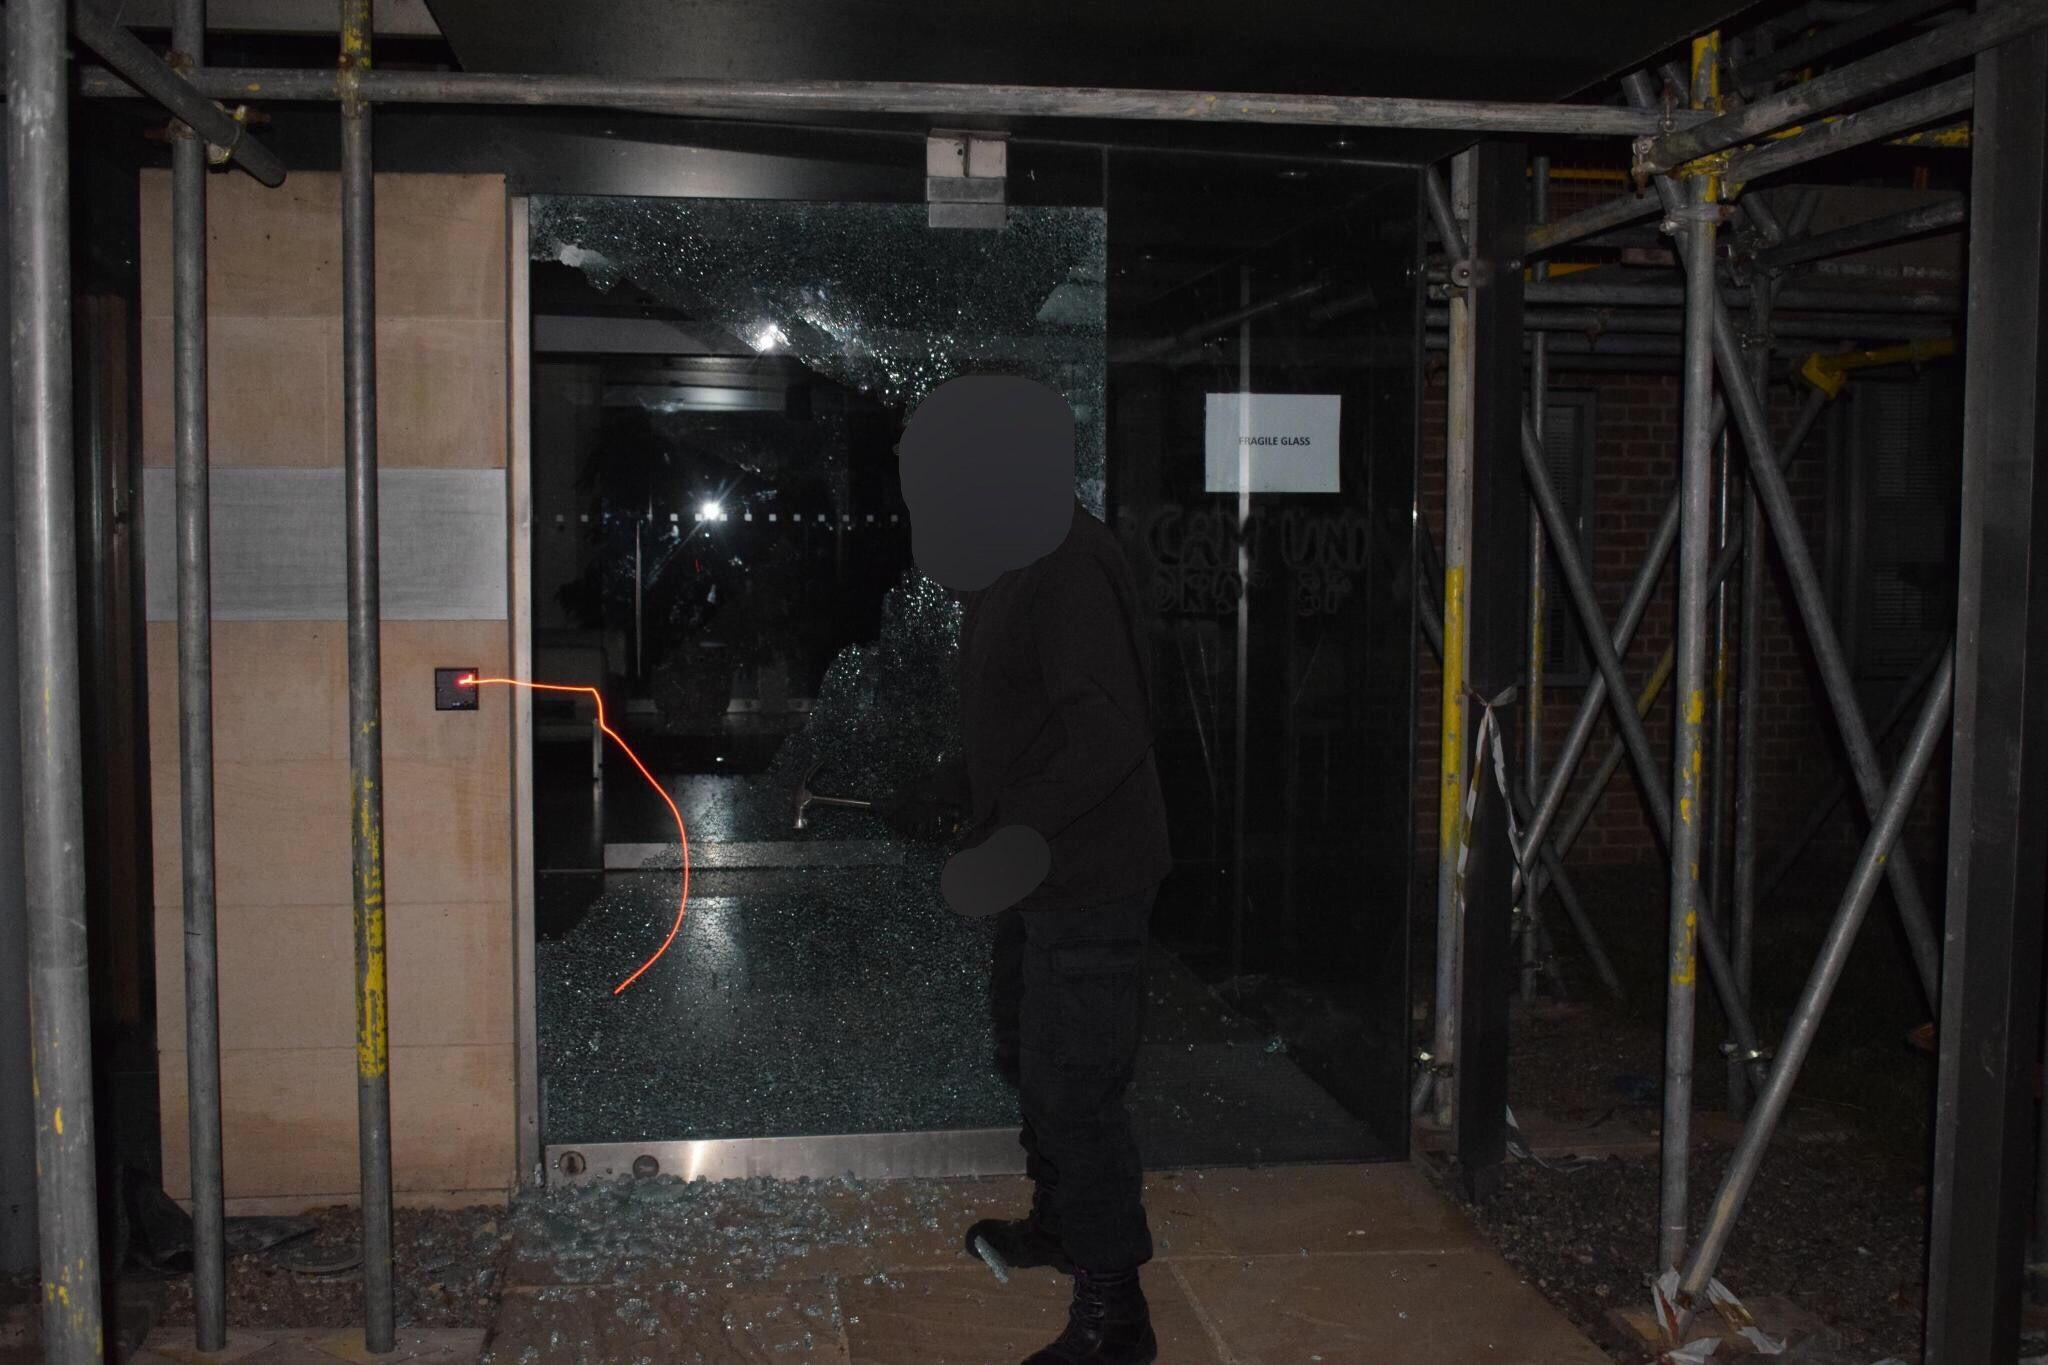 A climate activist smashes the glass door at the BP Institute, University of Cambridge.